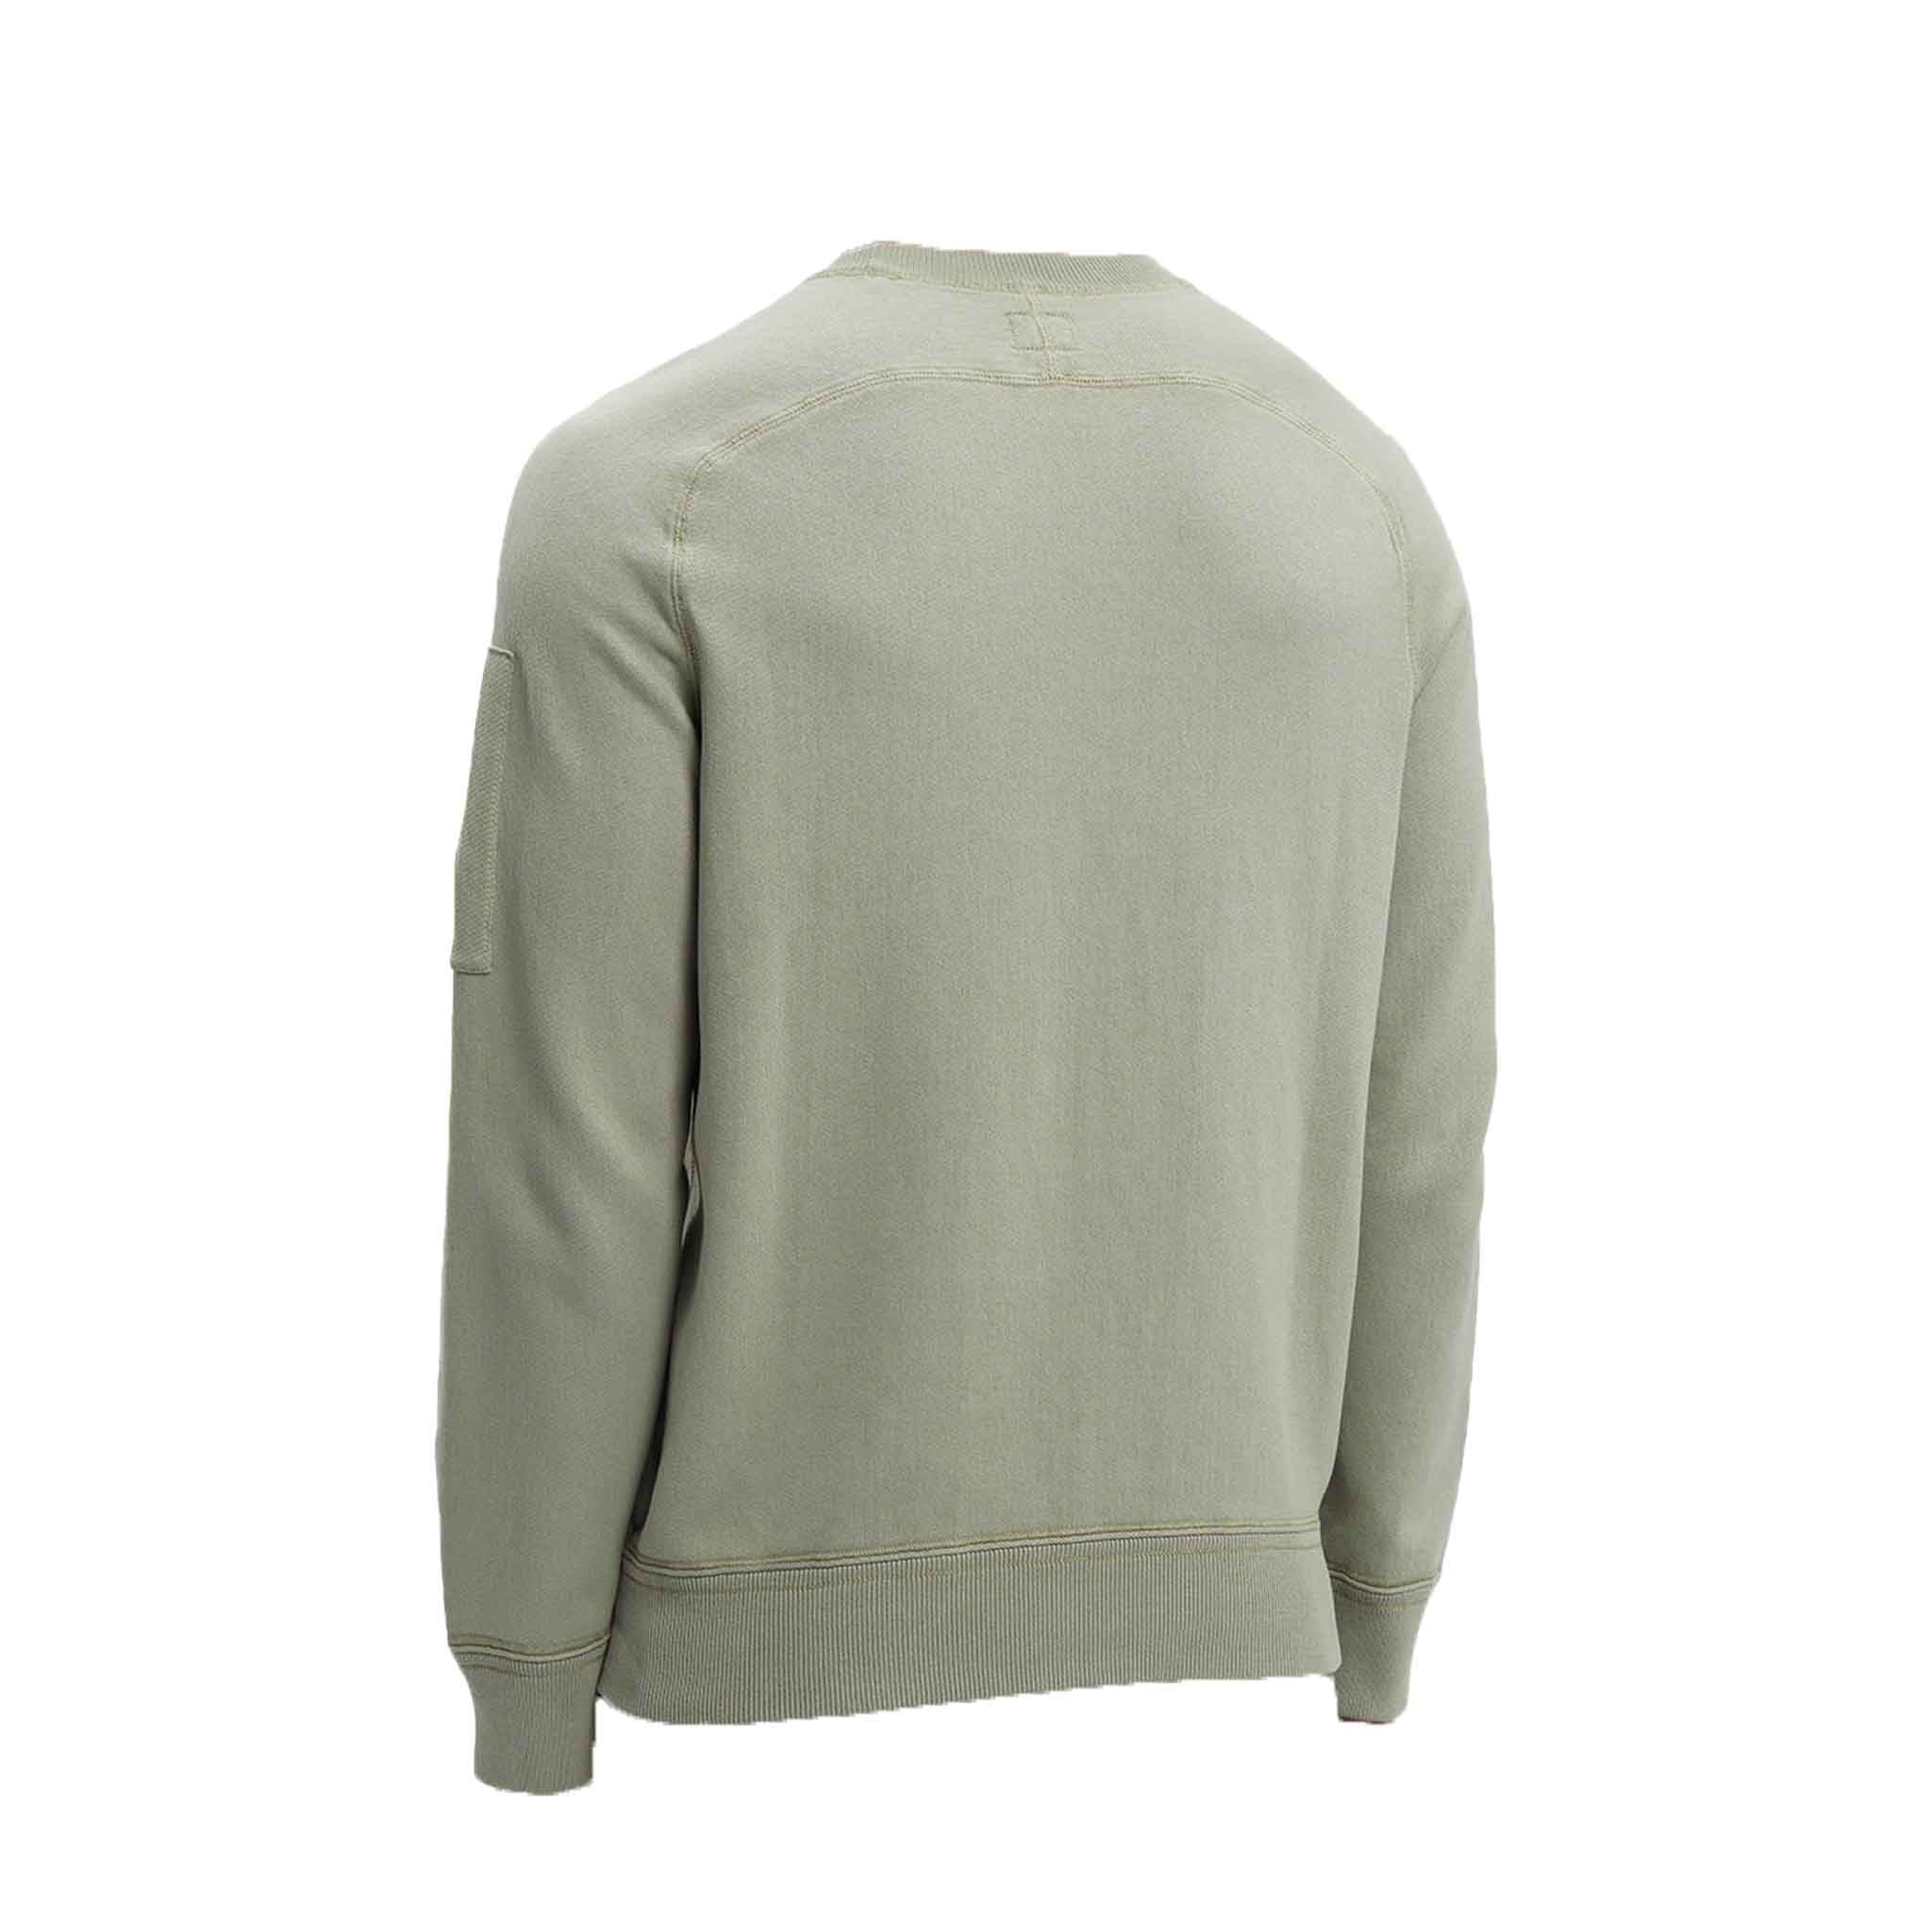 C.P. Company Cotton Knit Jumper in Silver Sage- Brown